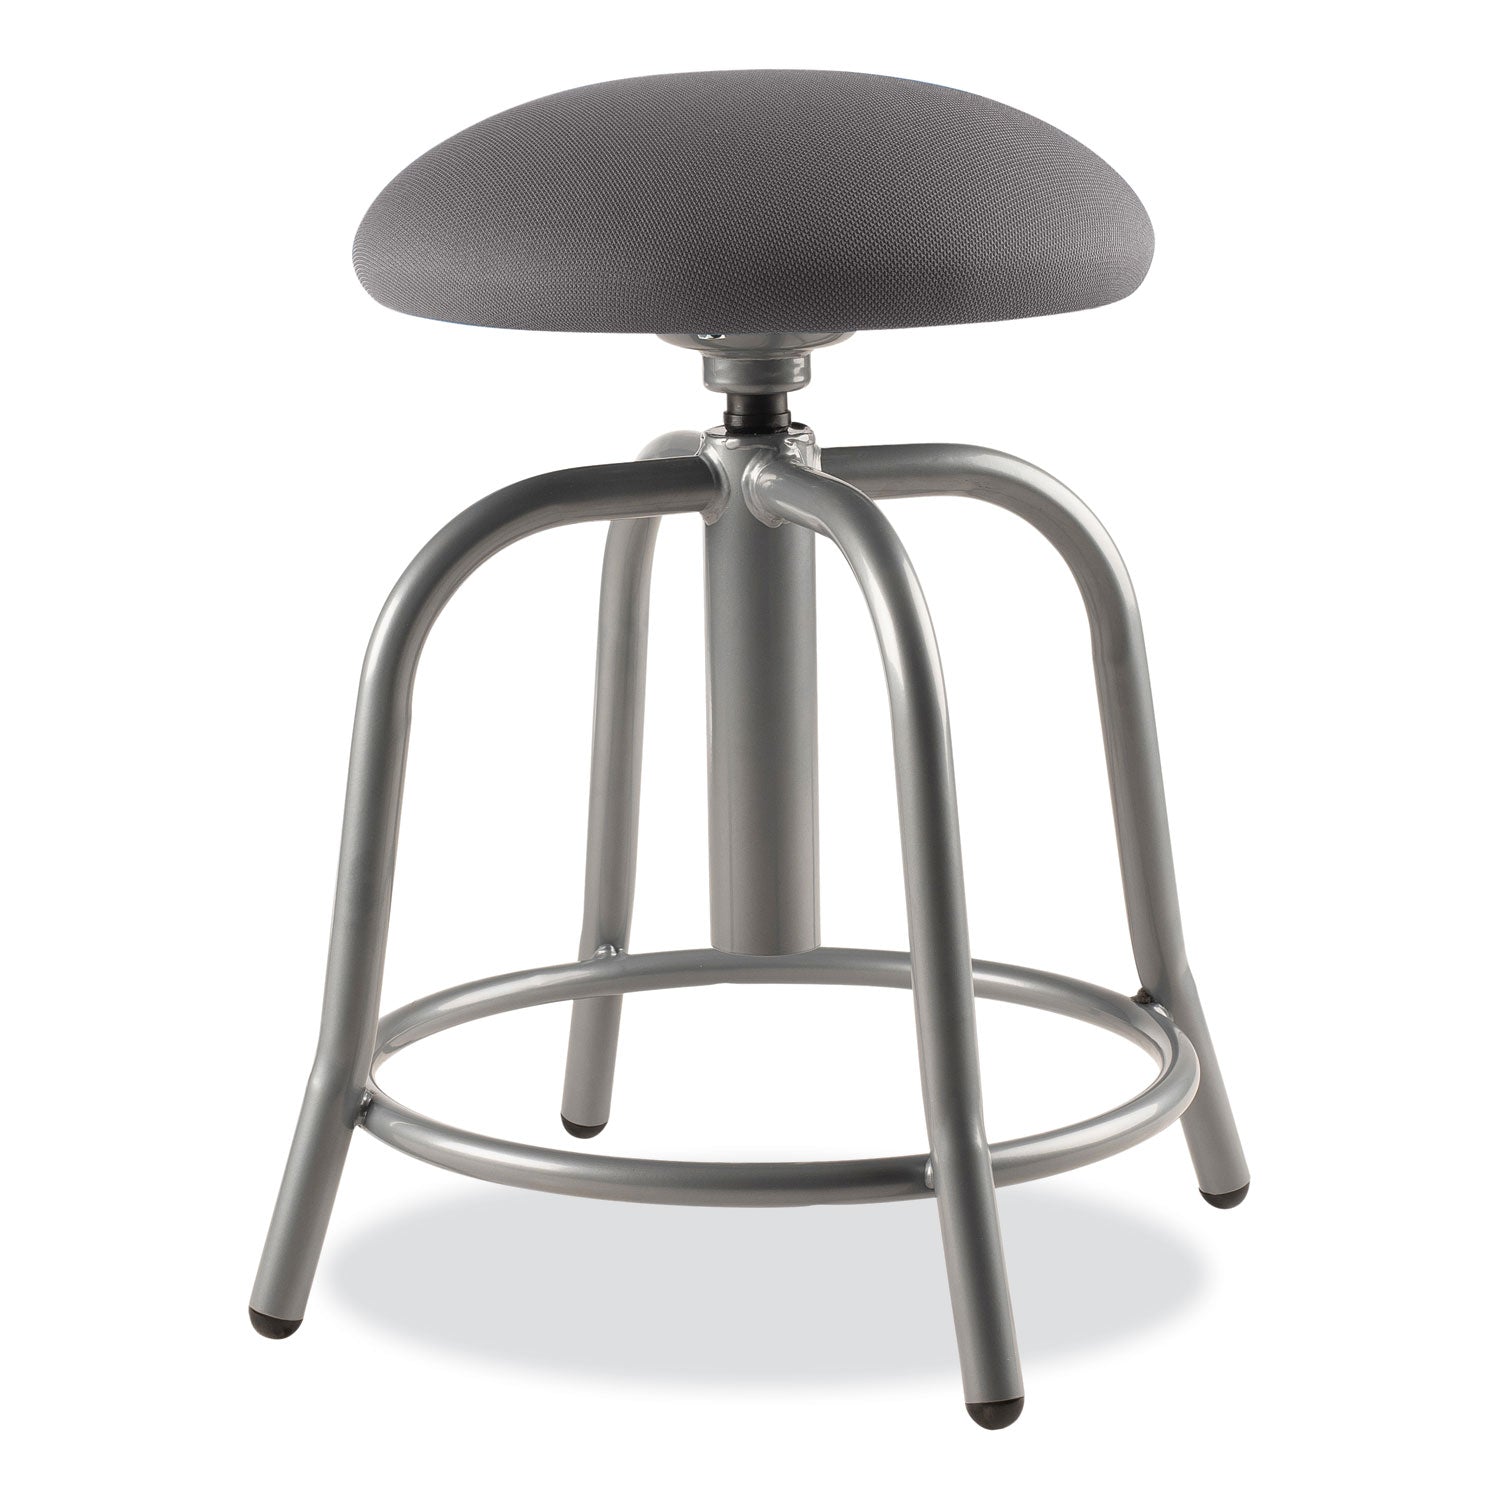 6800-series-height-adj-fabric-padded-swivel-stool-supports-300-lb-18-25-ht-charcoal-seat-gray-baseships-in-1-3-bus-days_nps6820s02 - 1